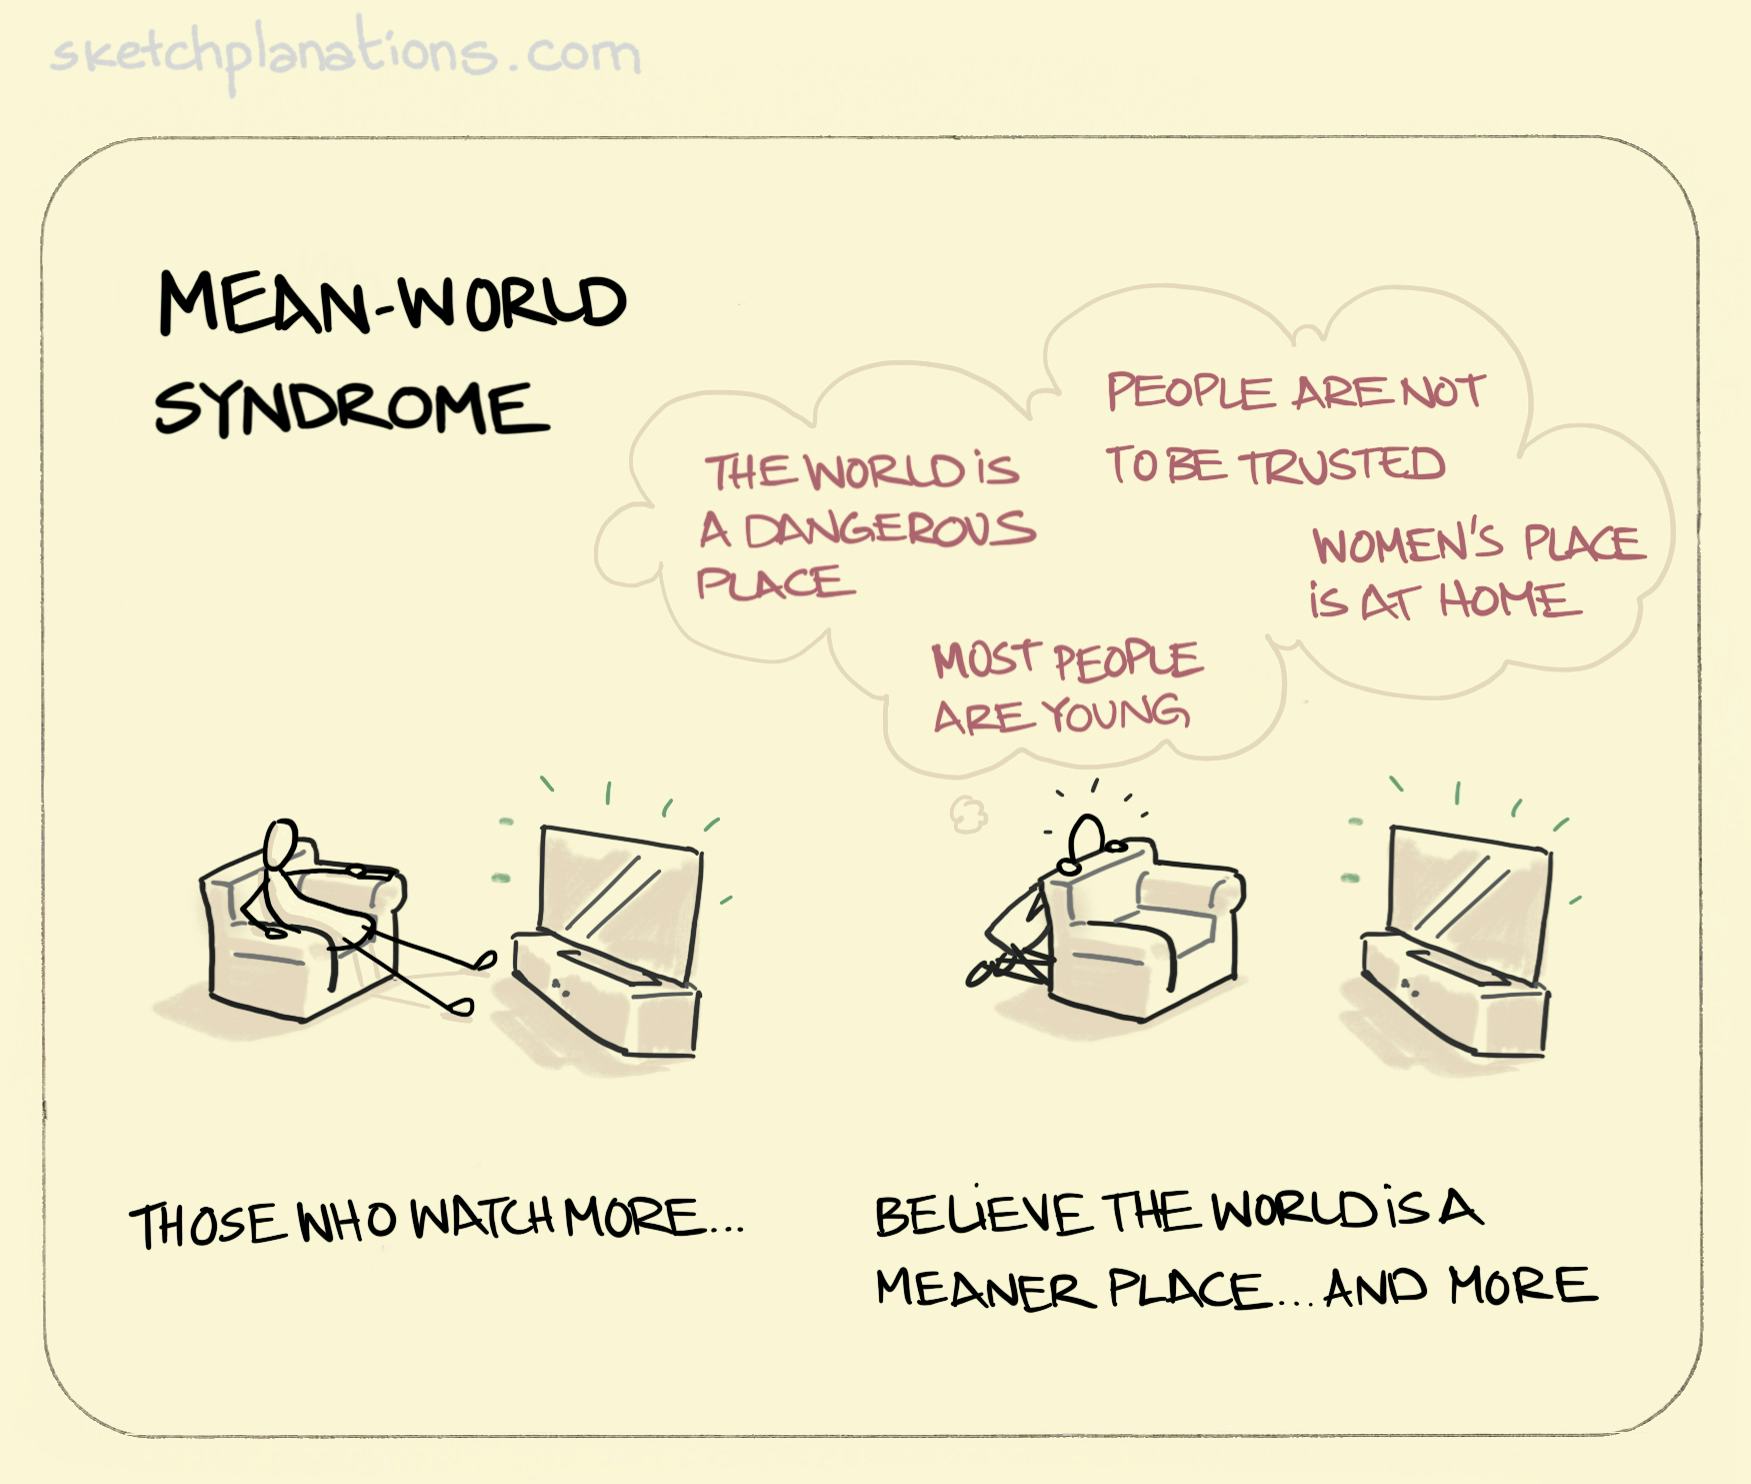 Mean world syndrome illustration: showing how those who watch more believe the world is a meaner place